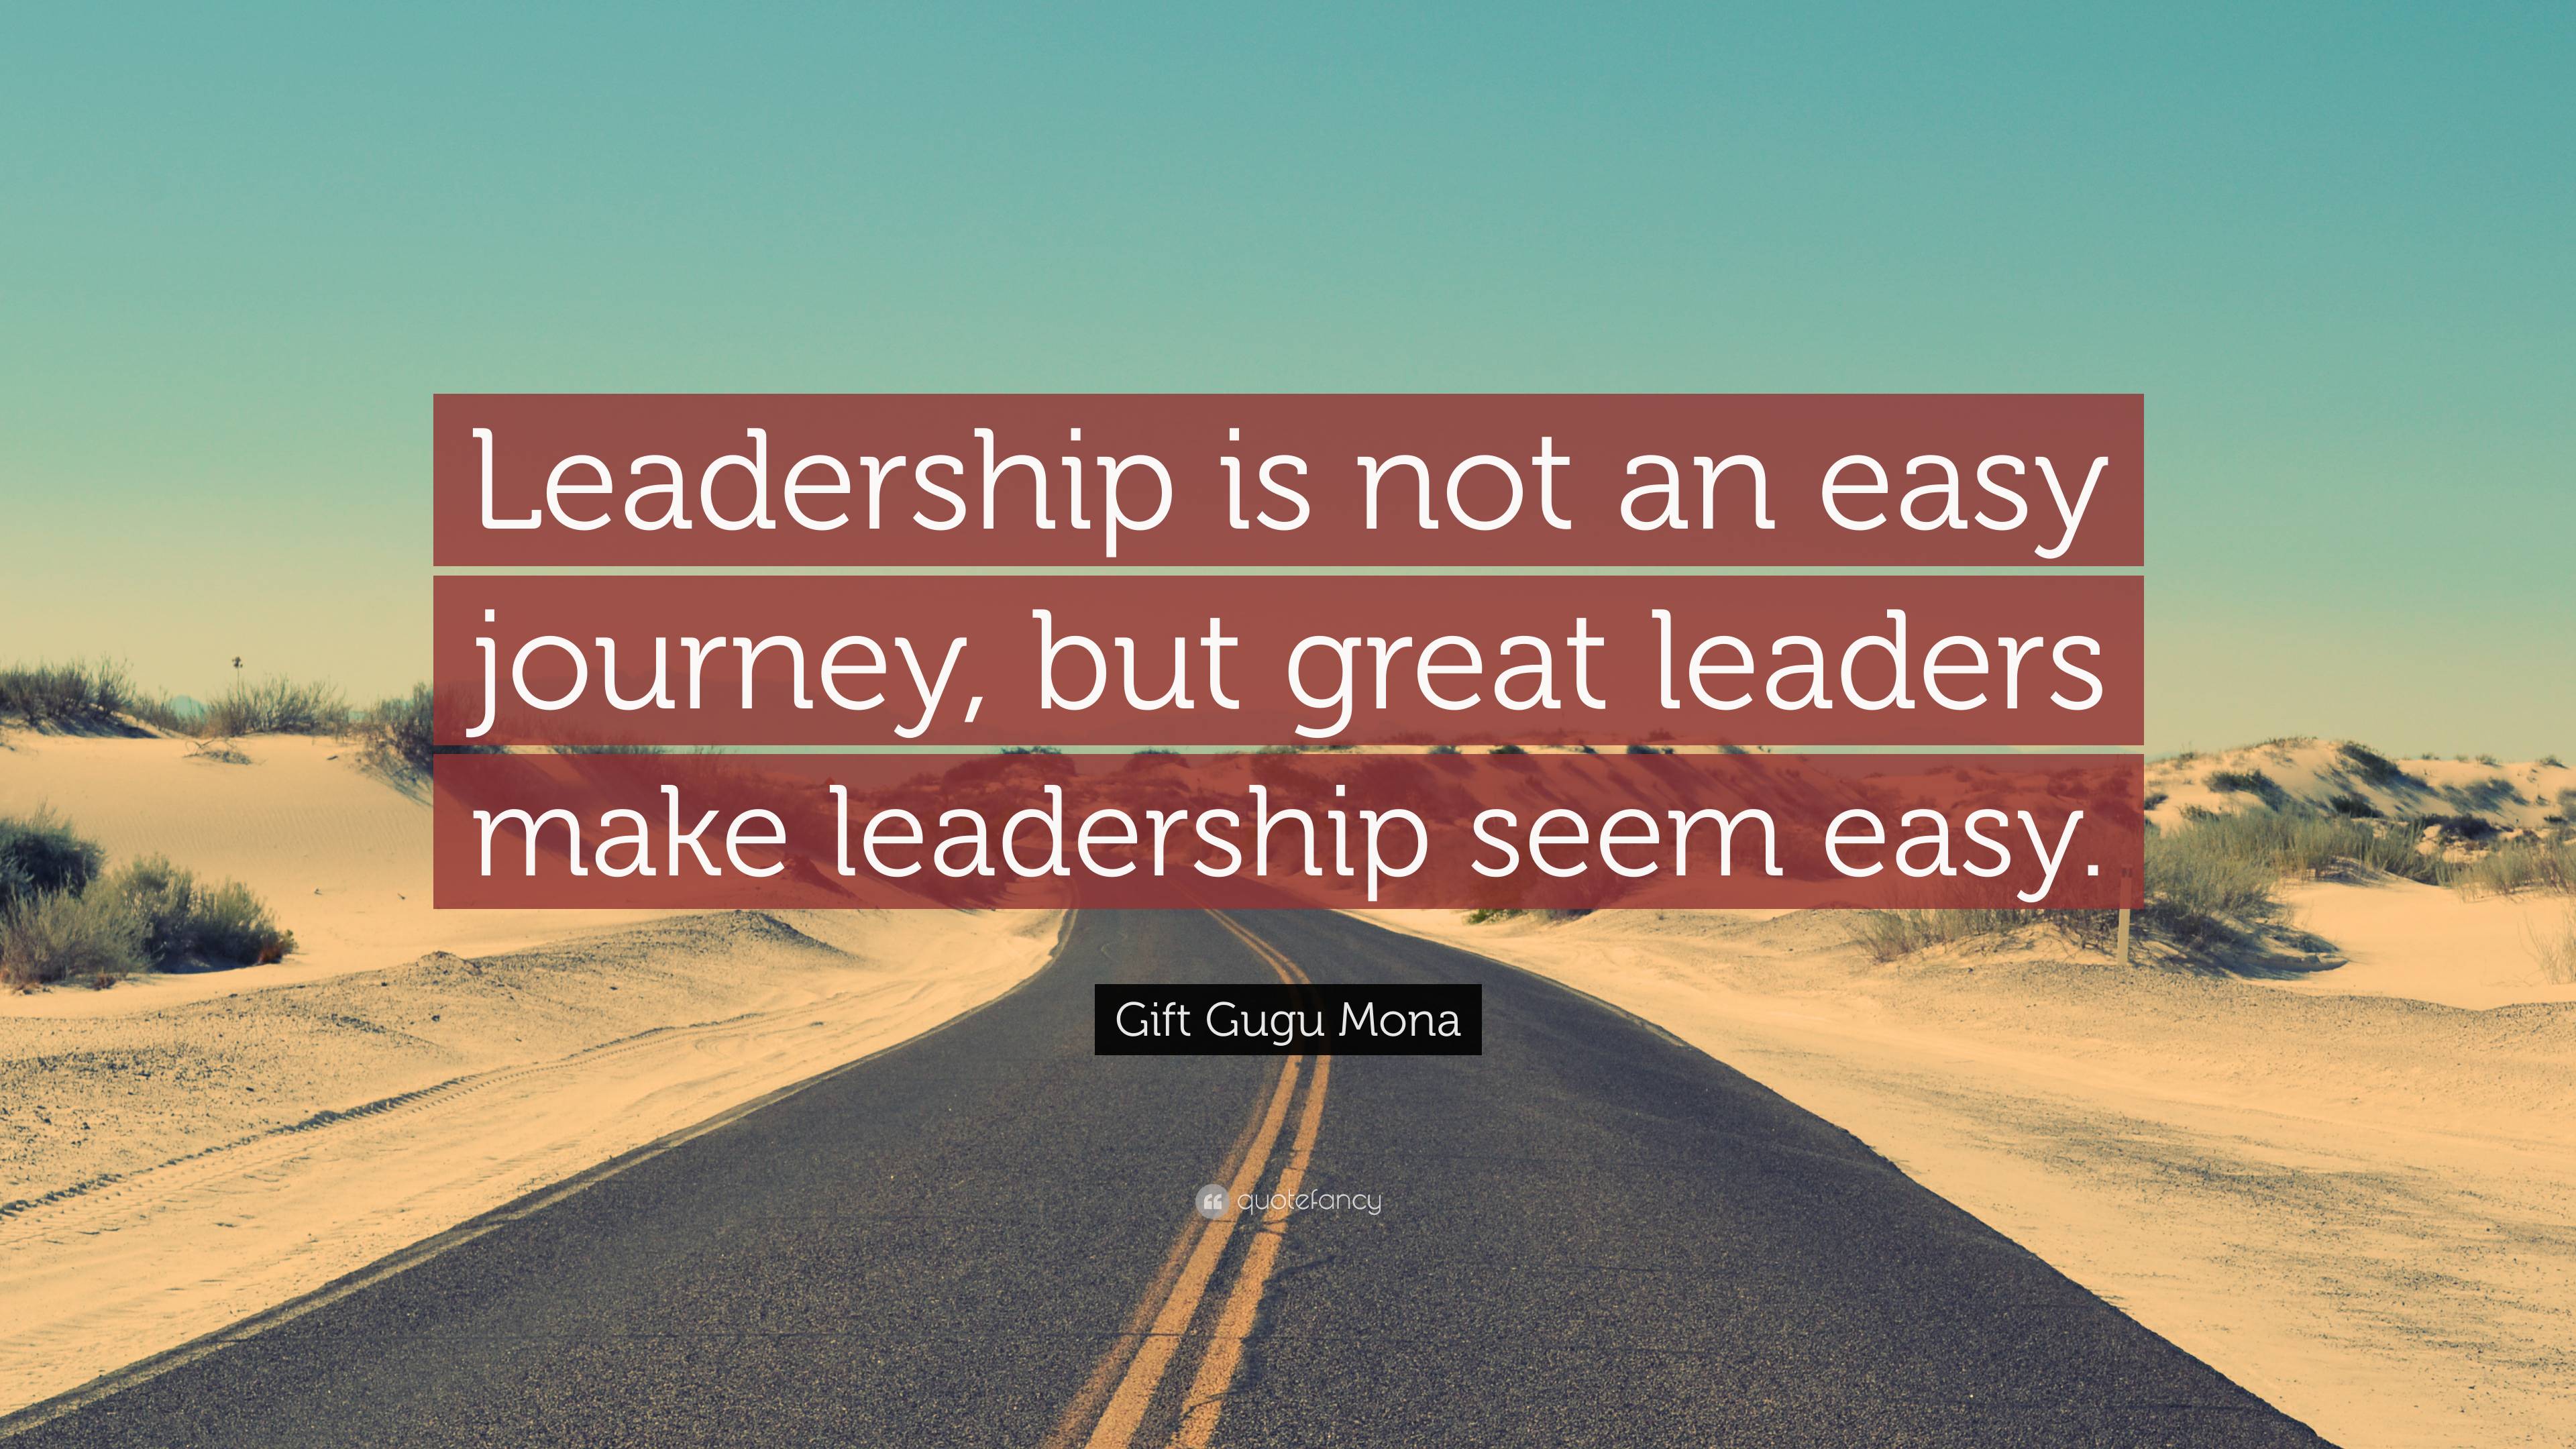 Gift Gugu Mona Quote: “Leadership is not an easy journey, but great ...